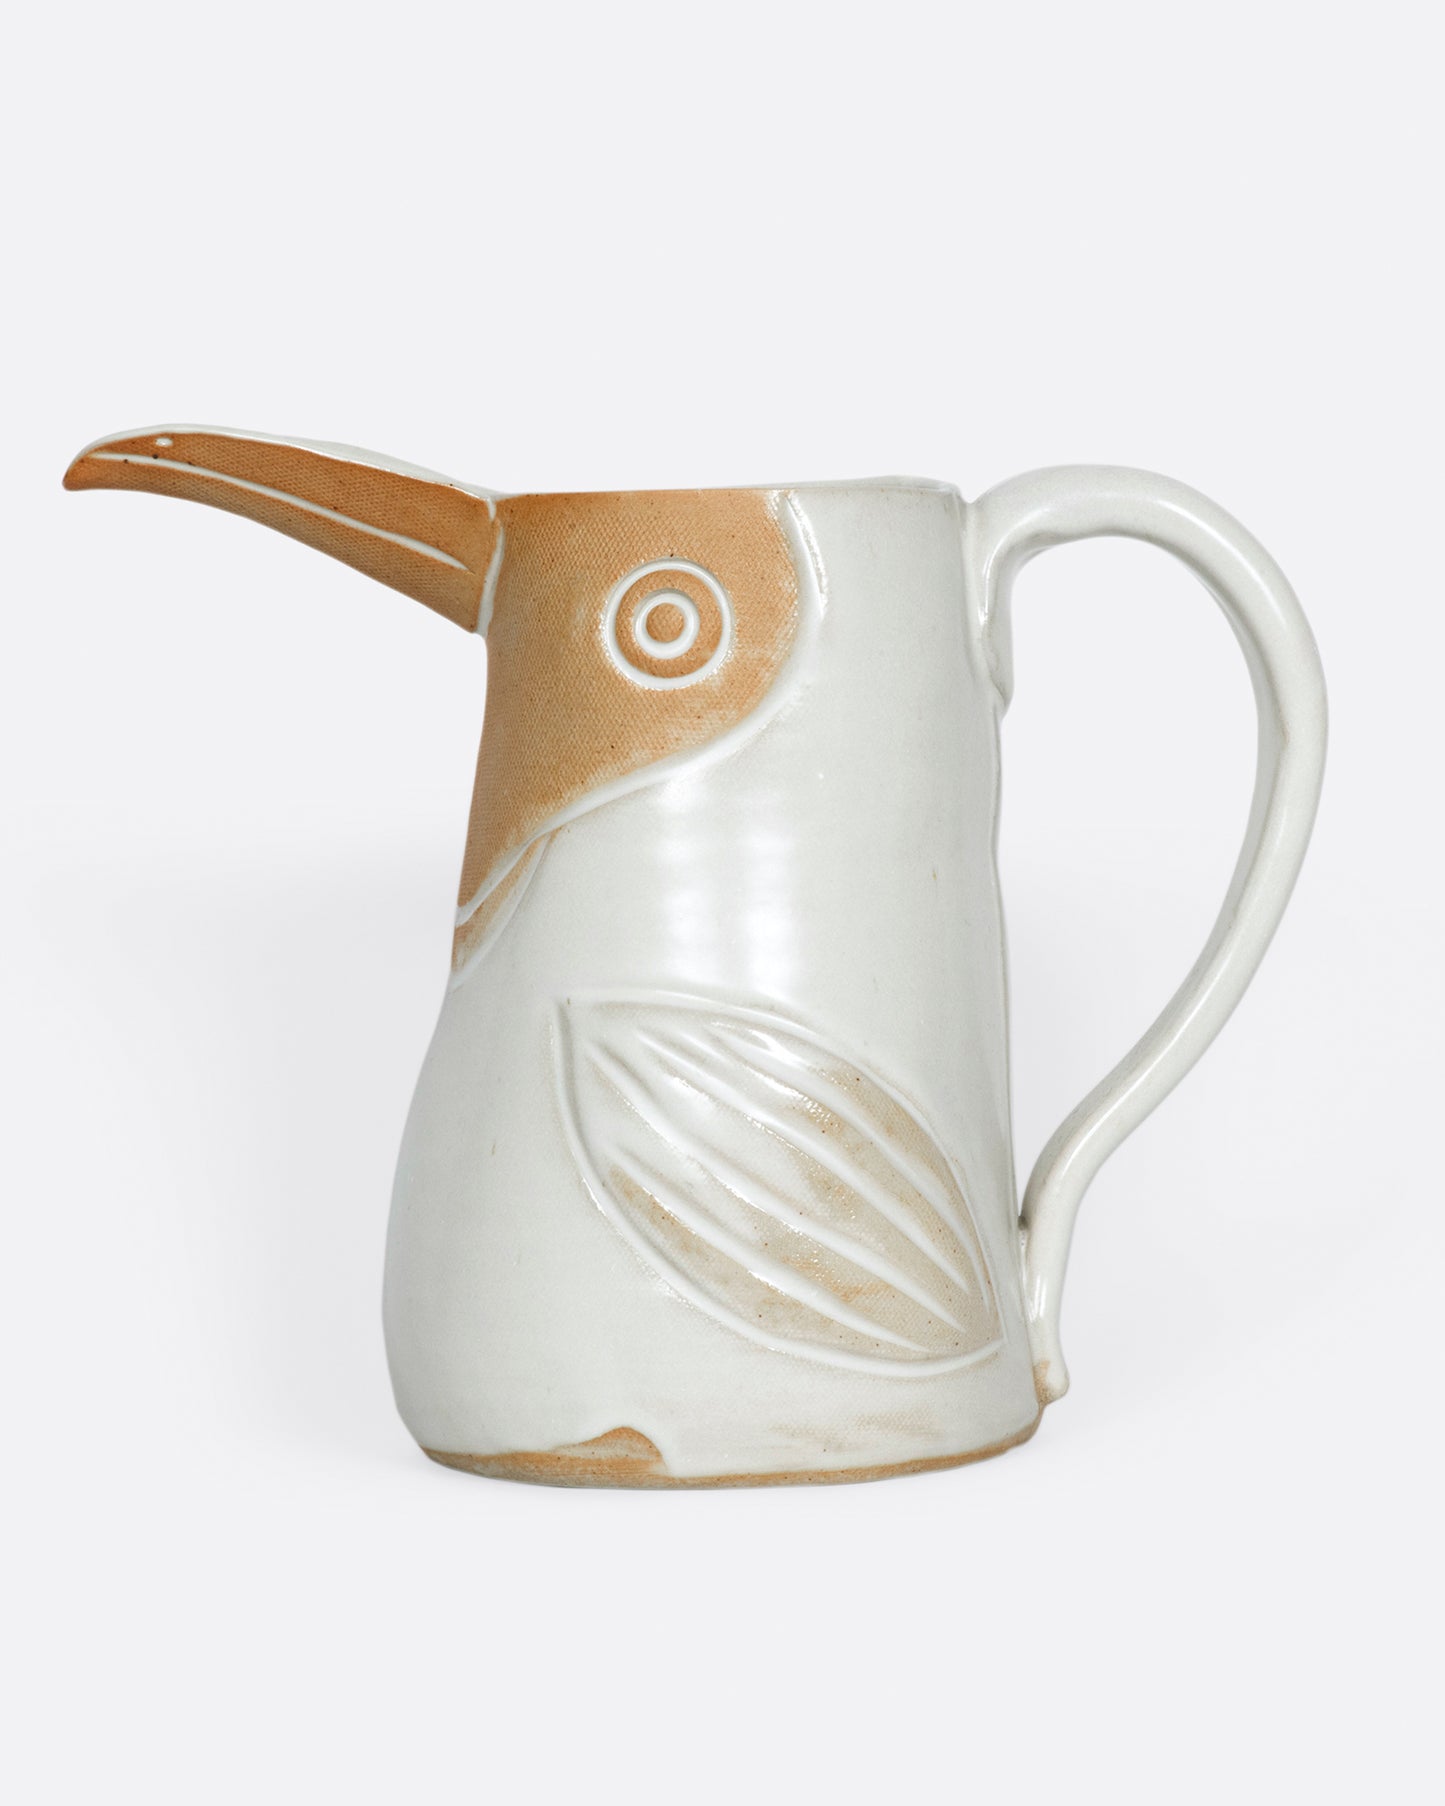 A ceramic pitcher to hold your favorite beverage or flowers.